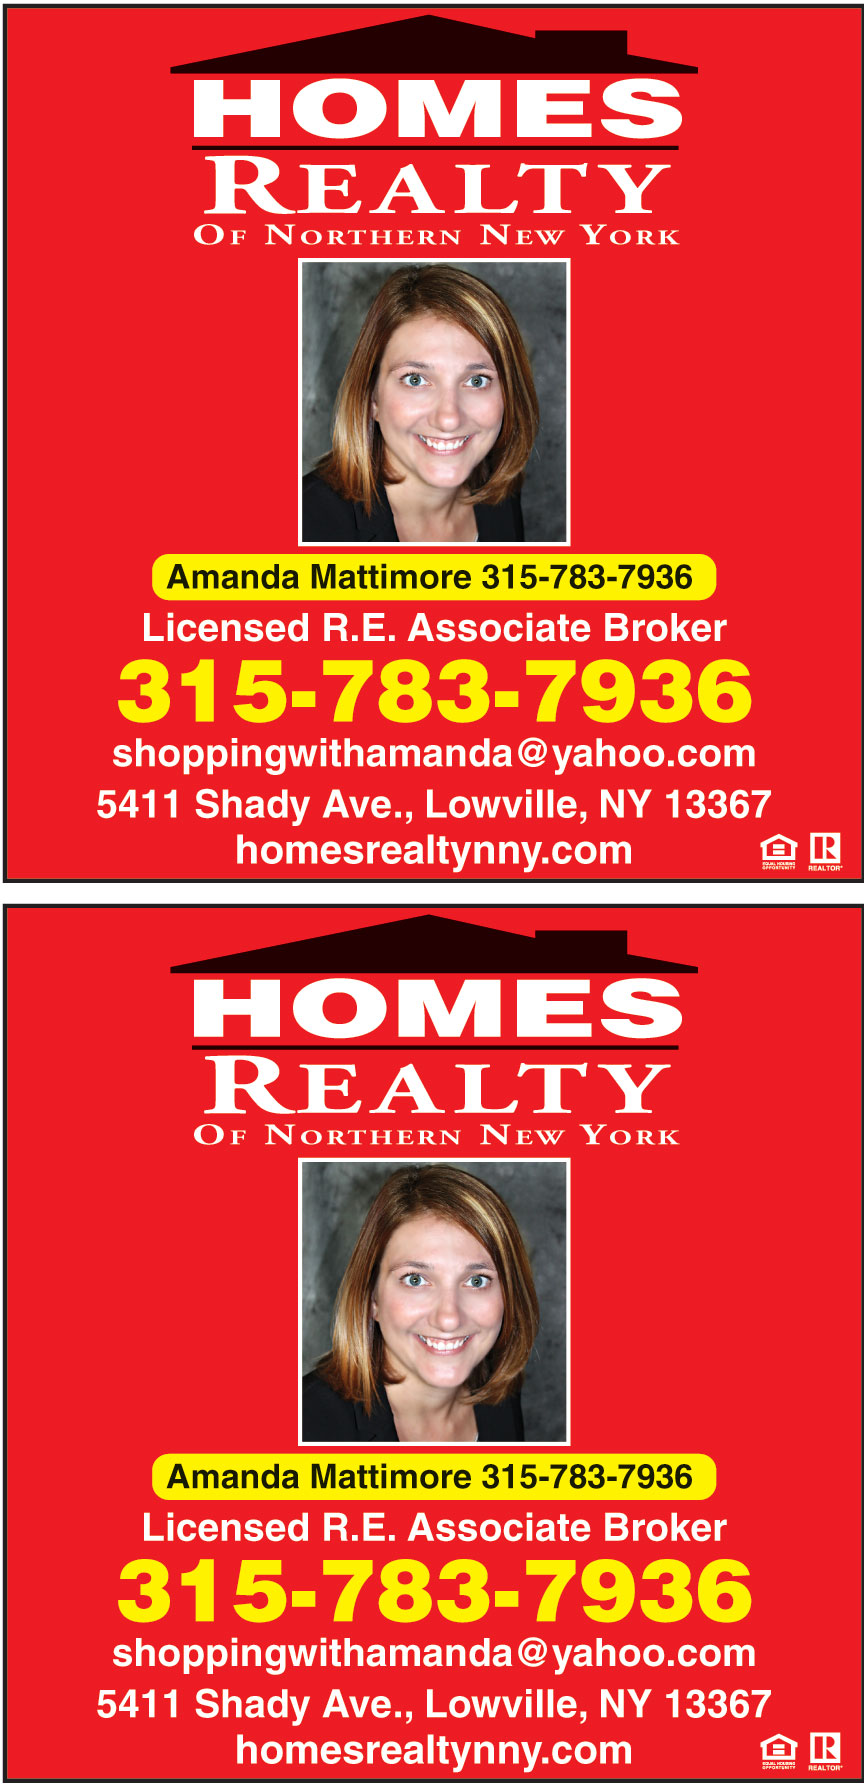 HOMES REALTY OF NORTHERN